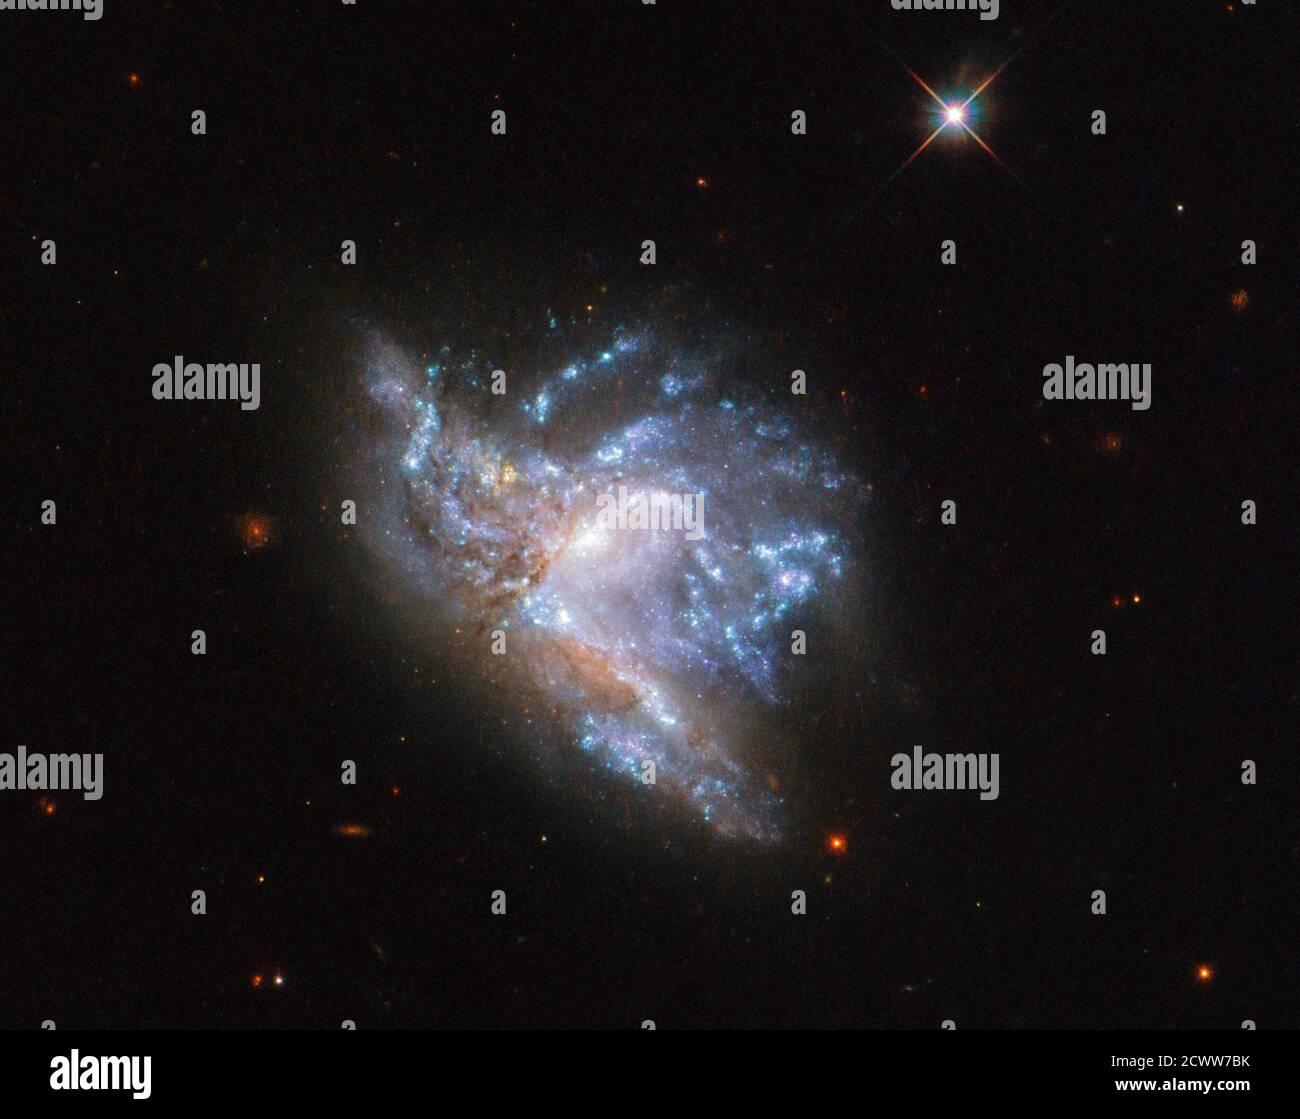 Hubble’s Dazzling Display of Two Colliding Galaxies Located in the constellation of Hercules, about 230 million light-years away, NGC 6052 is a pair of colliding galaxies. They were first discovered in 1784 by William Herschel and were originally classified as a single irregular galaxy because of their odd shape. However, we now know that NGC 6052 actually consists of two galaxies that are in the process of colliding. This particular image of NGC 6052 was taken using the Wide Field Camera 3 on the NASA/ESA Hubble Space Telescope.  A long time ago gravity drew the two galaxies together into the Stock Photo